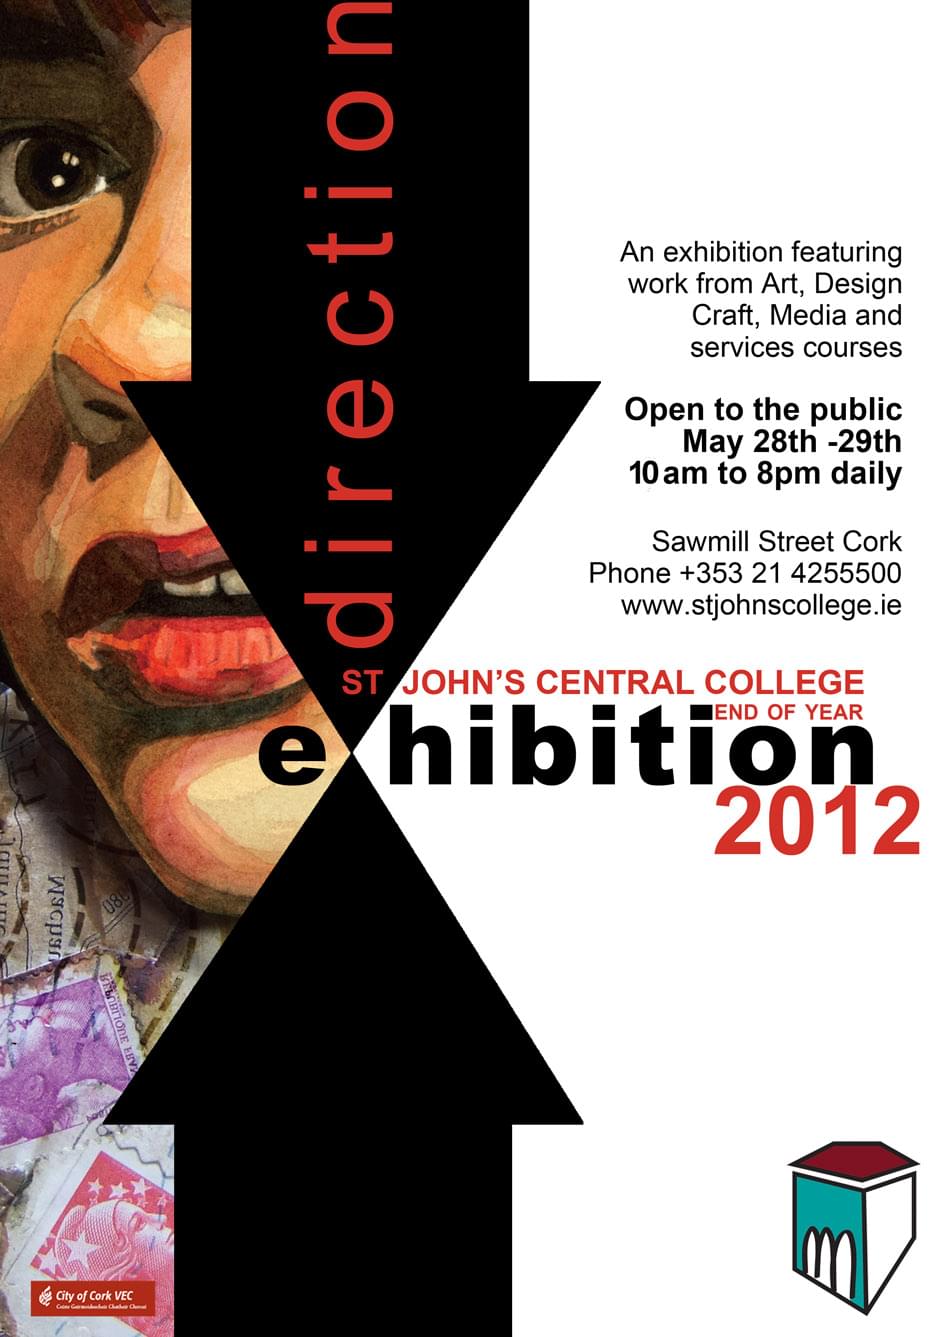 End of Year Exhibition 2012